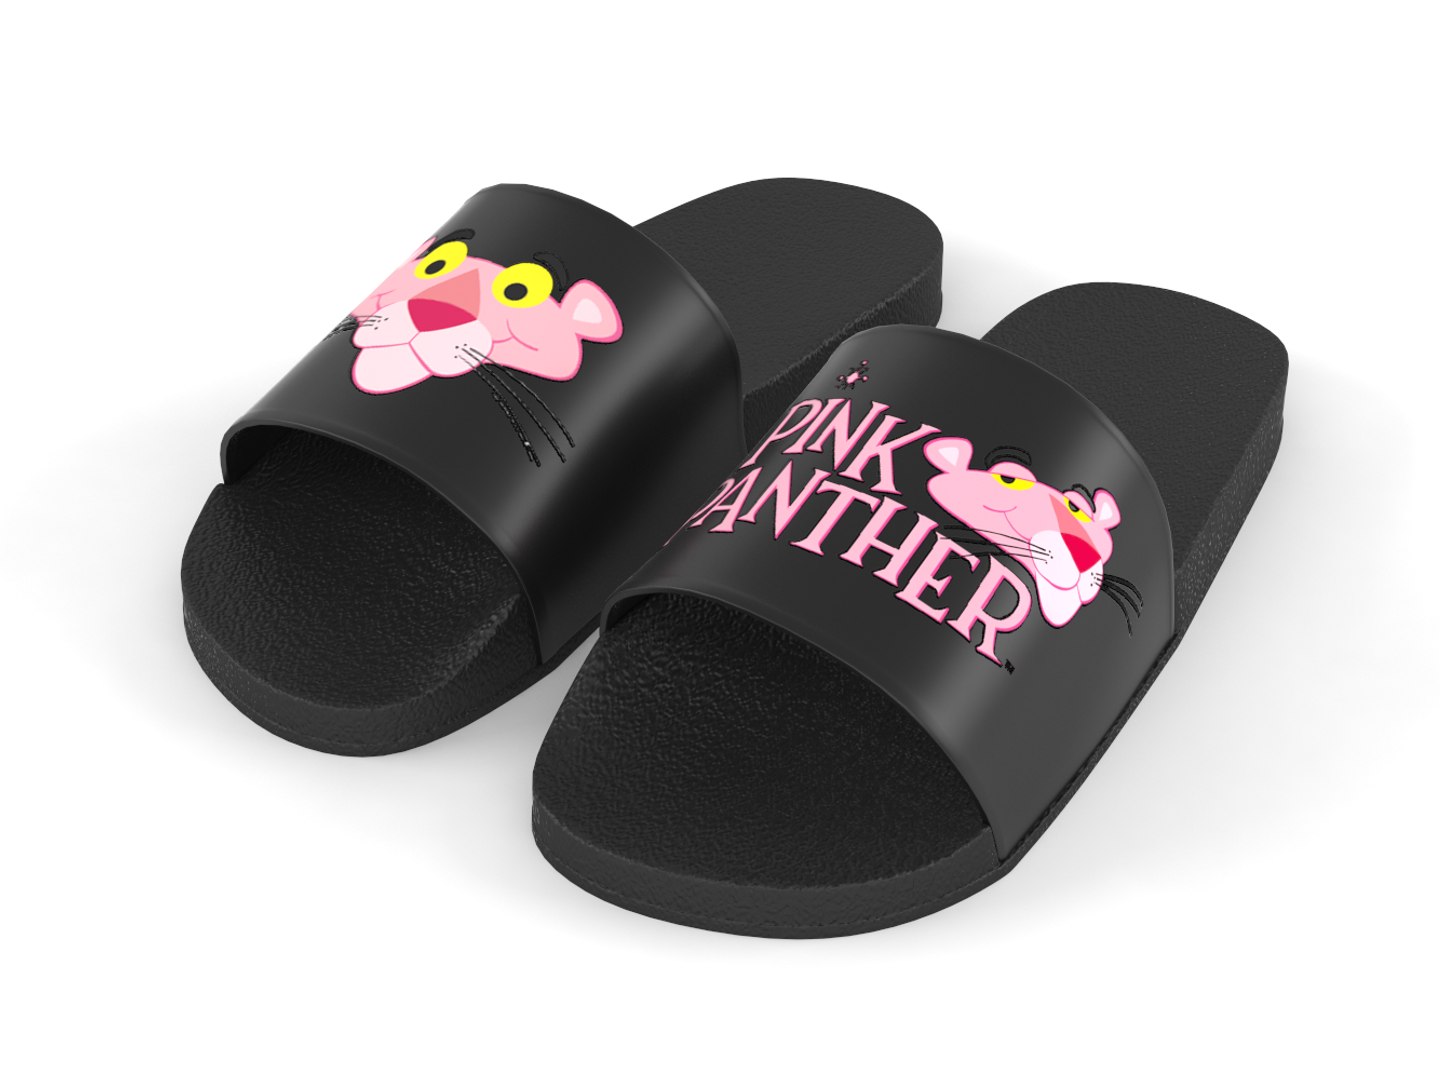 3D pink panther home slipper - TurboSquid 1619919